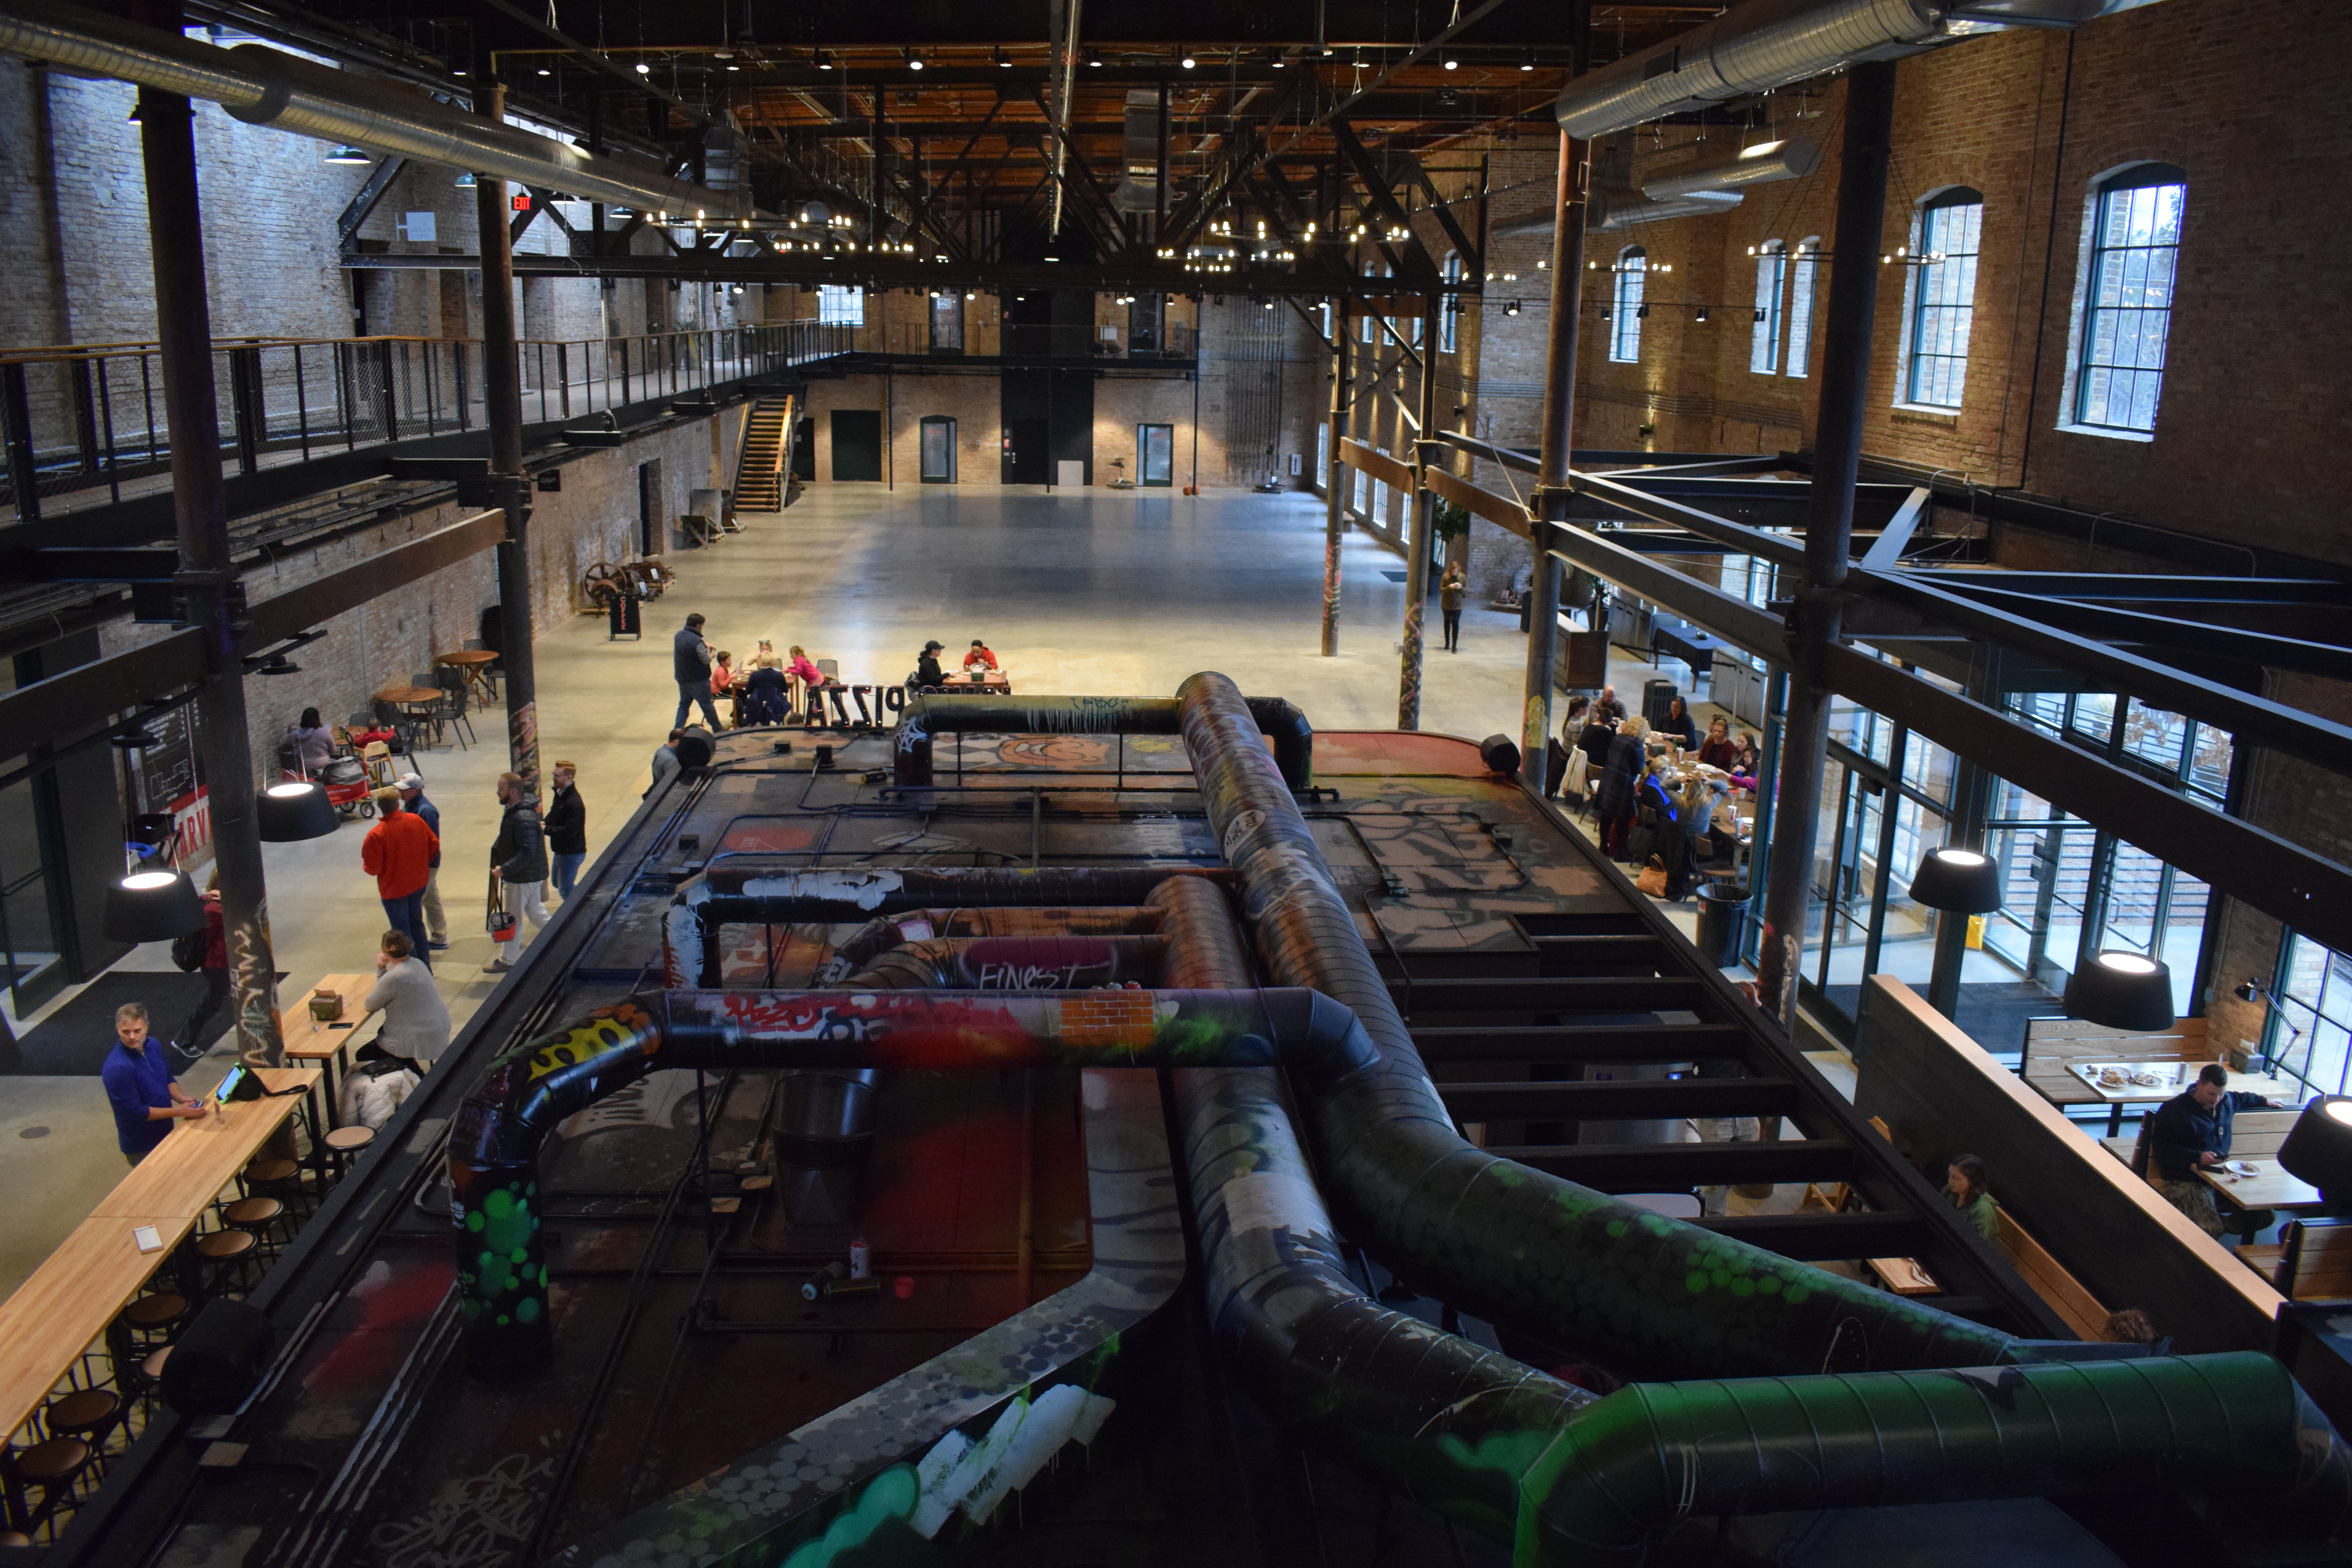 Exposed duct work with colorful graffiti is visible from the second floor inside the an industrial-looking building. Beyond the duct work, exposed beams, lighting, and a balcony can be seen, as well as a large open space on the first floor with passersby.  